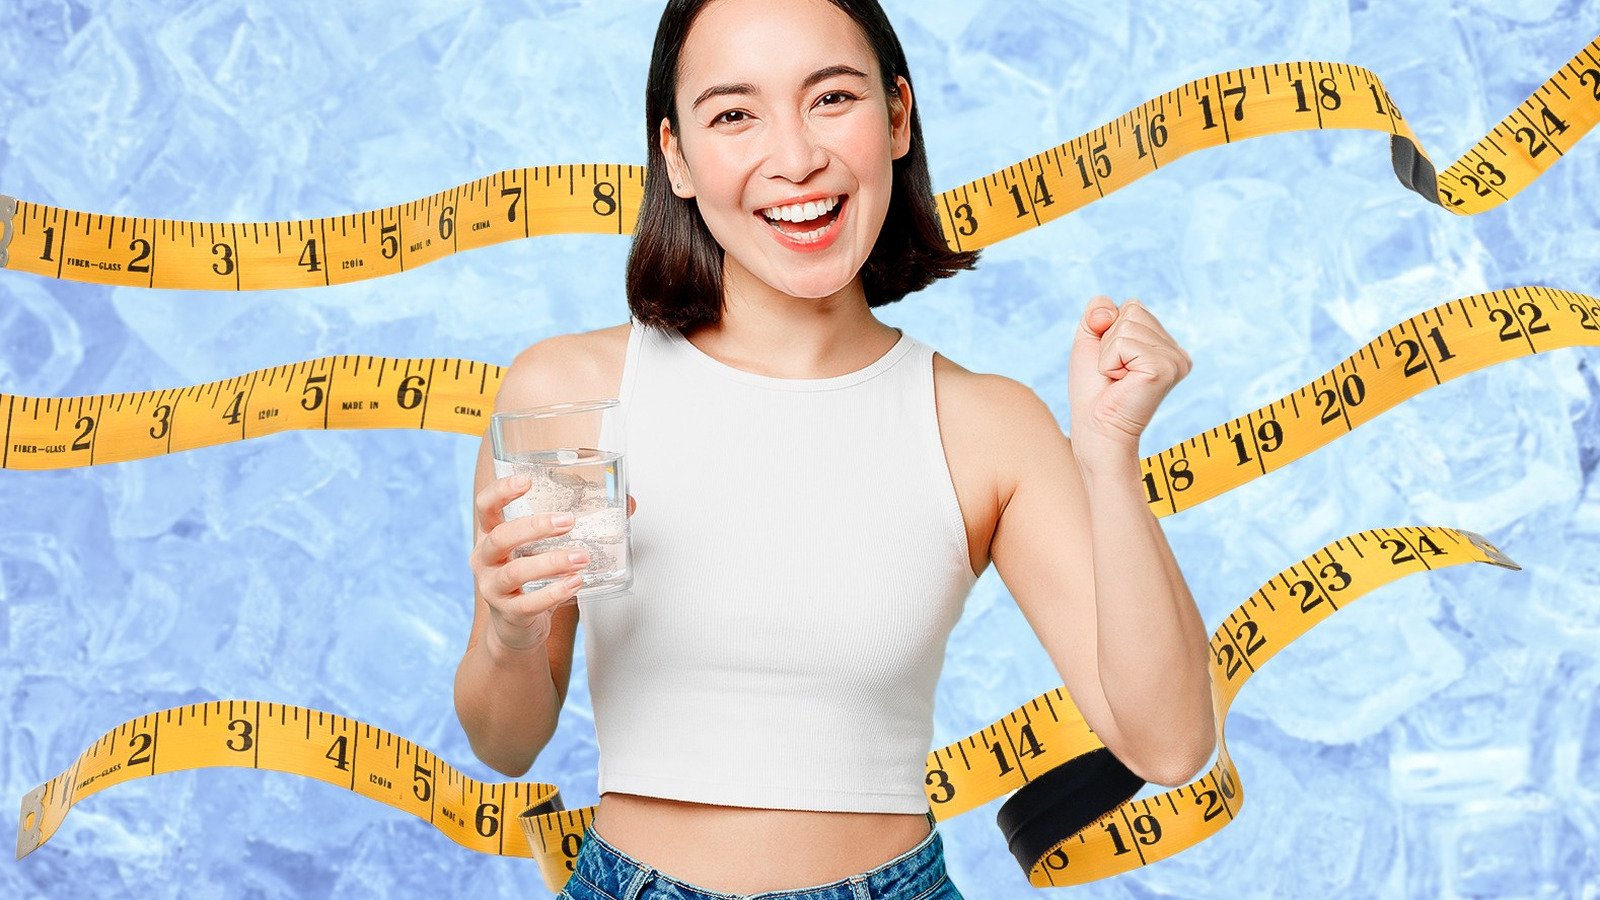 What Is The Ice Hack Diet Why Is It So Popular? Here's What We Know - Glam